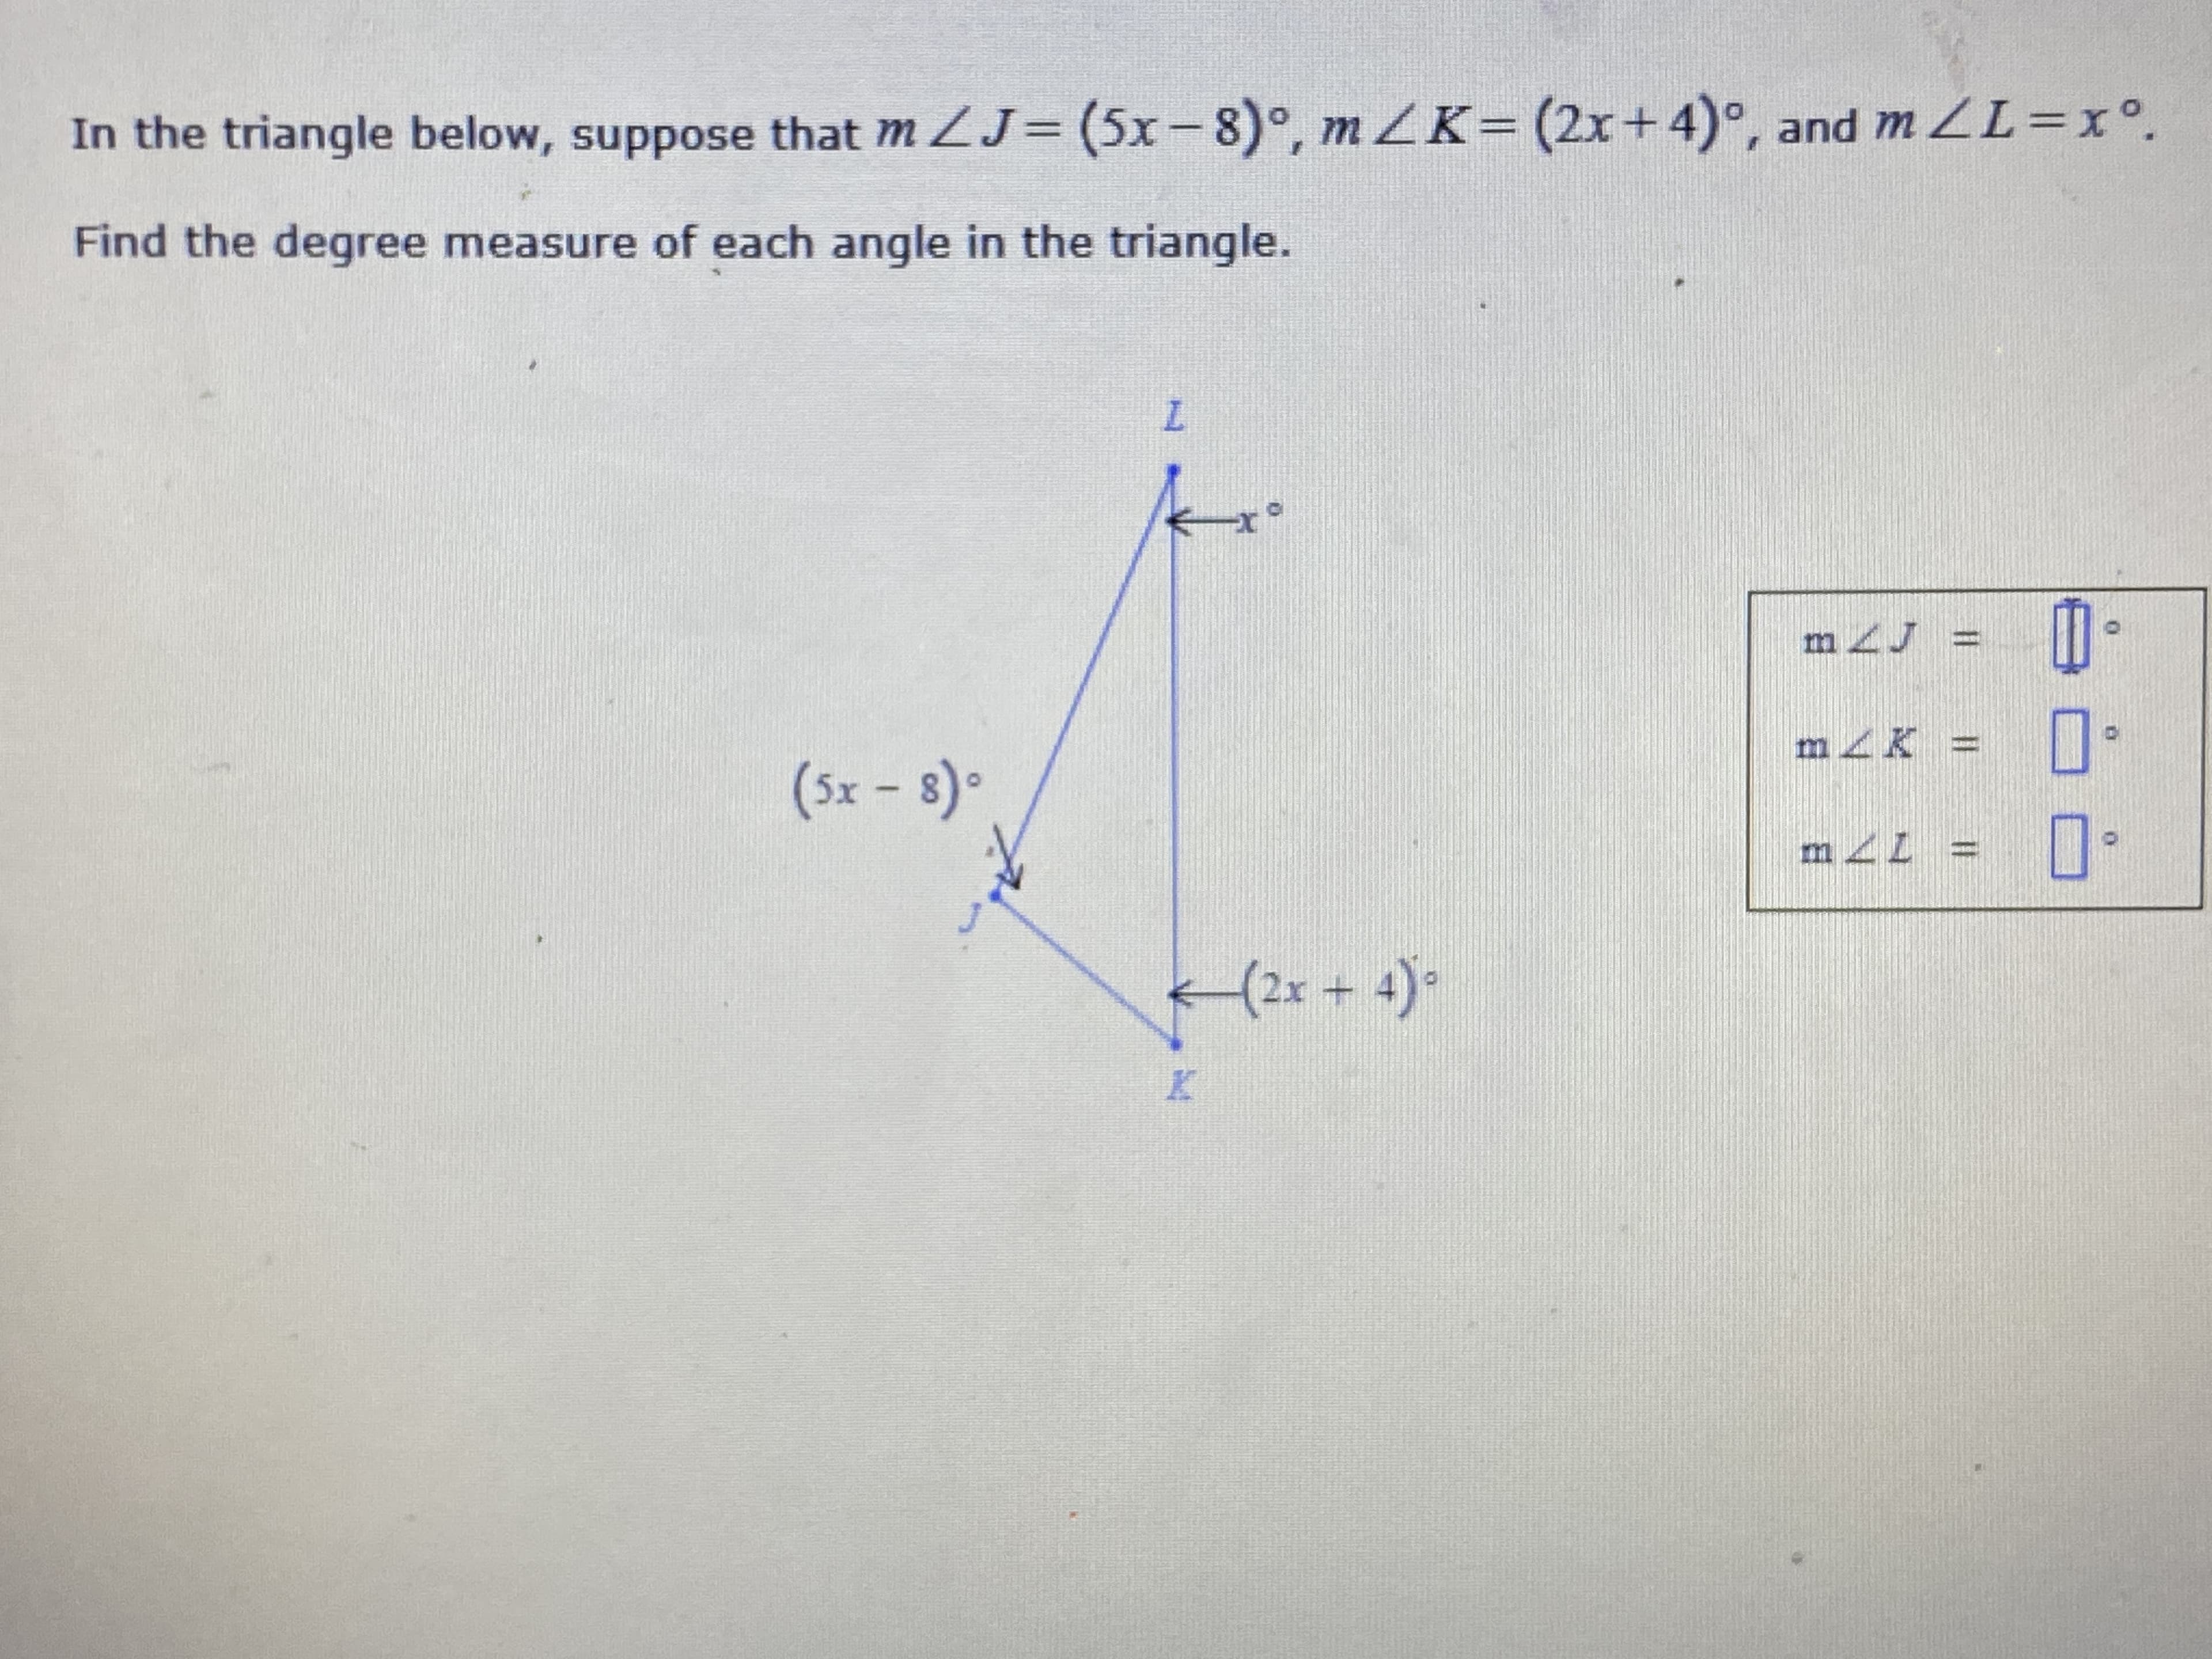 **Problem Statement:**

In the triangle below, suppose that \( m \angle J = (5x - 8)^\circ \), \( m \angle K = (2x + 4)^\circ \), and \( m \angle L = x^\circ \).

Find the degree measure of each angle in the triangle.

**Diagram:**

A triangle \( \triangle JKL \) is shown with its angles marked as follows:
- \( \angle J \) is marked as \( (5x - 8)^\circ \)
- \( \angle K \) is marked as \( (2x + 4)^\circ \)
- \( \angle L \) is marked as \( x^\circ \)

There is also a boxed section for answers to be filled in, which includes:
- \( m \angle J = \) _____ \(^\circ \)
- \( m \angle K = \) _____ \(^\circ \)
- \( m \angle L = \) _____ \(^\circ \)

**Solution Steps:**

1. **Sum of Angles in a Triangle:**

   The sum of the interior angles in any triangle is \( 180^\circ \). Therefore, we can set up the following equation:
   \[
   m \angle J + m \angle K + m \angle L = 180^\circ
   \]
   Substituting the given expressions for \( m \angle J \), \( m \angle K \), and \( m \angle L \):
   \[
   (5x - 8) + (2x + 4) + x = 180
   \]

2. **Combine Like Terms:**

   Combine the terms involving \( x \) and the constant terms:
   \[
   5x + 2x + x - 8 + 4 = 180
   \]
   \[
   8x - 4 = 180
   \]

3. **Solve for \( x \):**

   Add 4 to both sides of the equation:
   \[
   8x - 4 + 4 = 180 + 4
   \]
   \[
   8x = 184
   \]
   Divide both sides by 8:
   \[
   x = \frac{184}{8}
   \]
   \[
   x = 23
   \